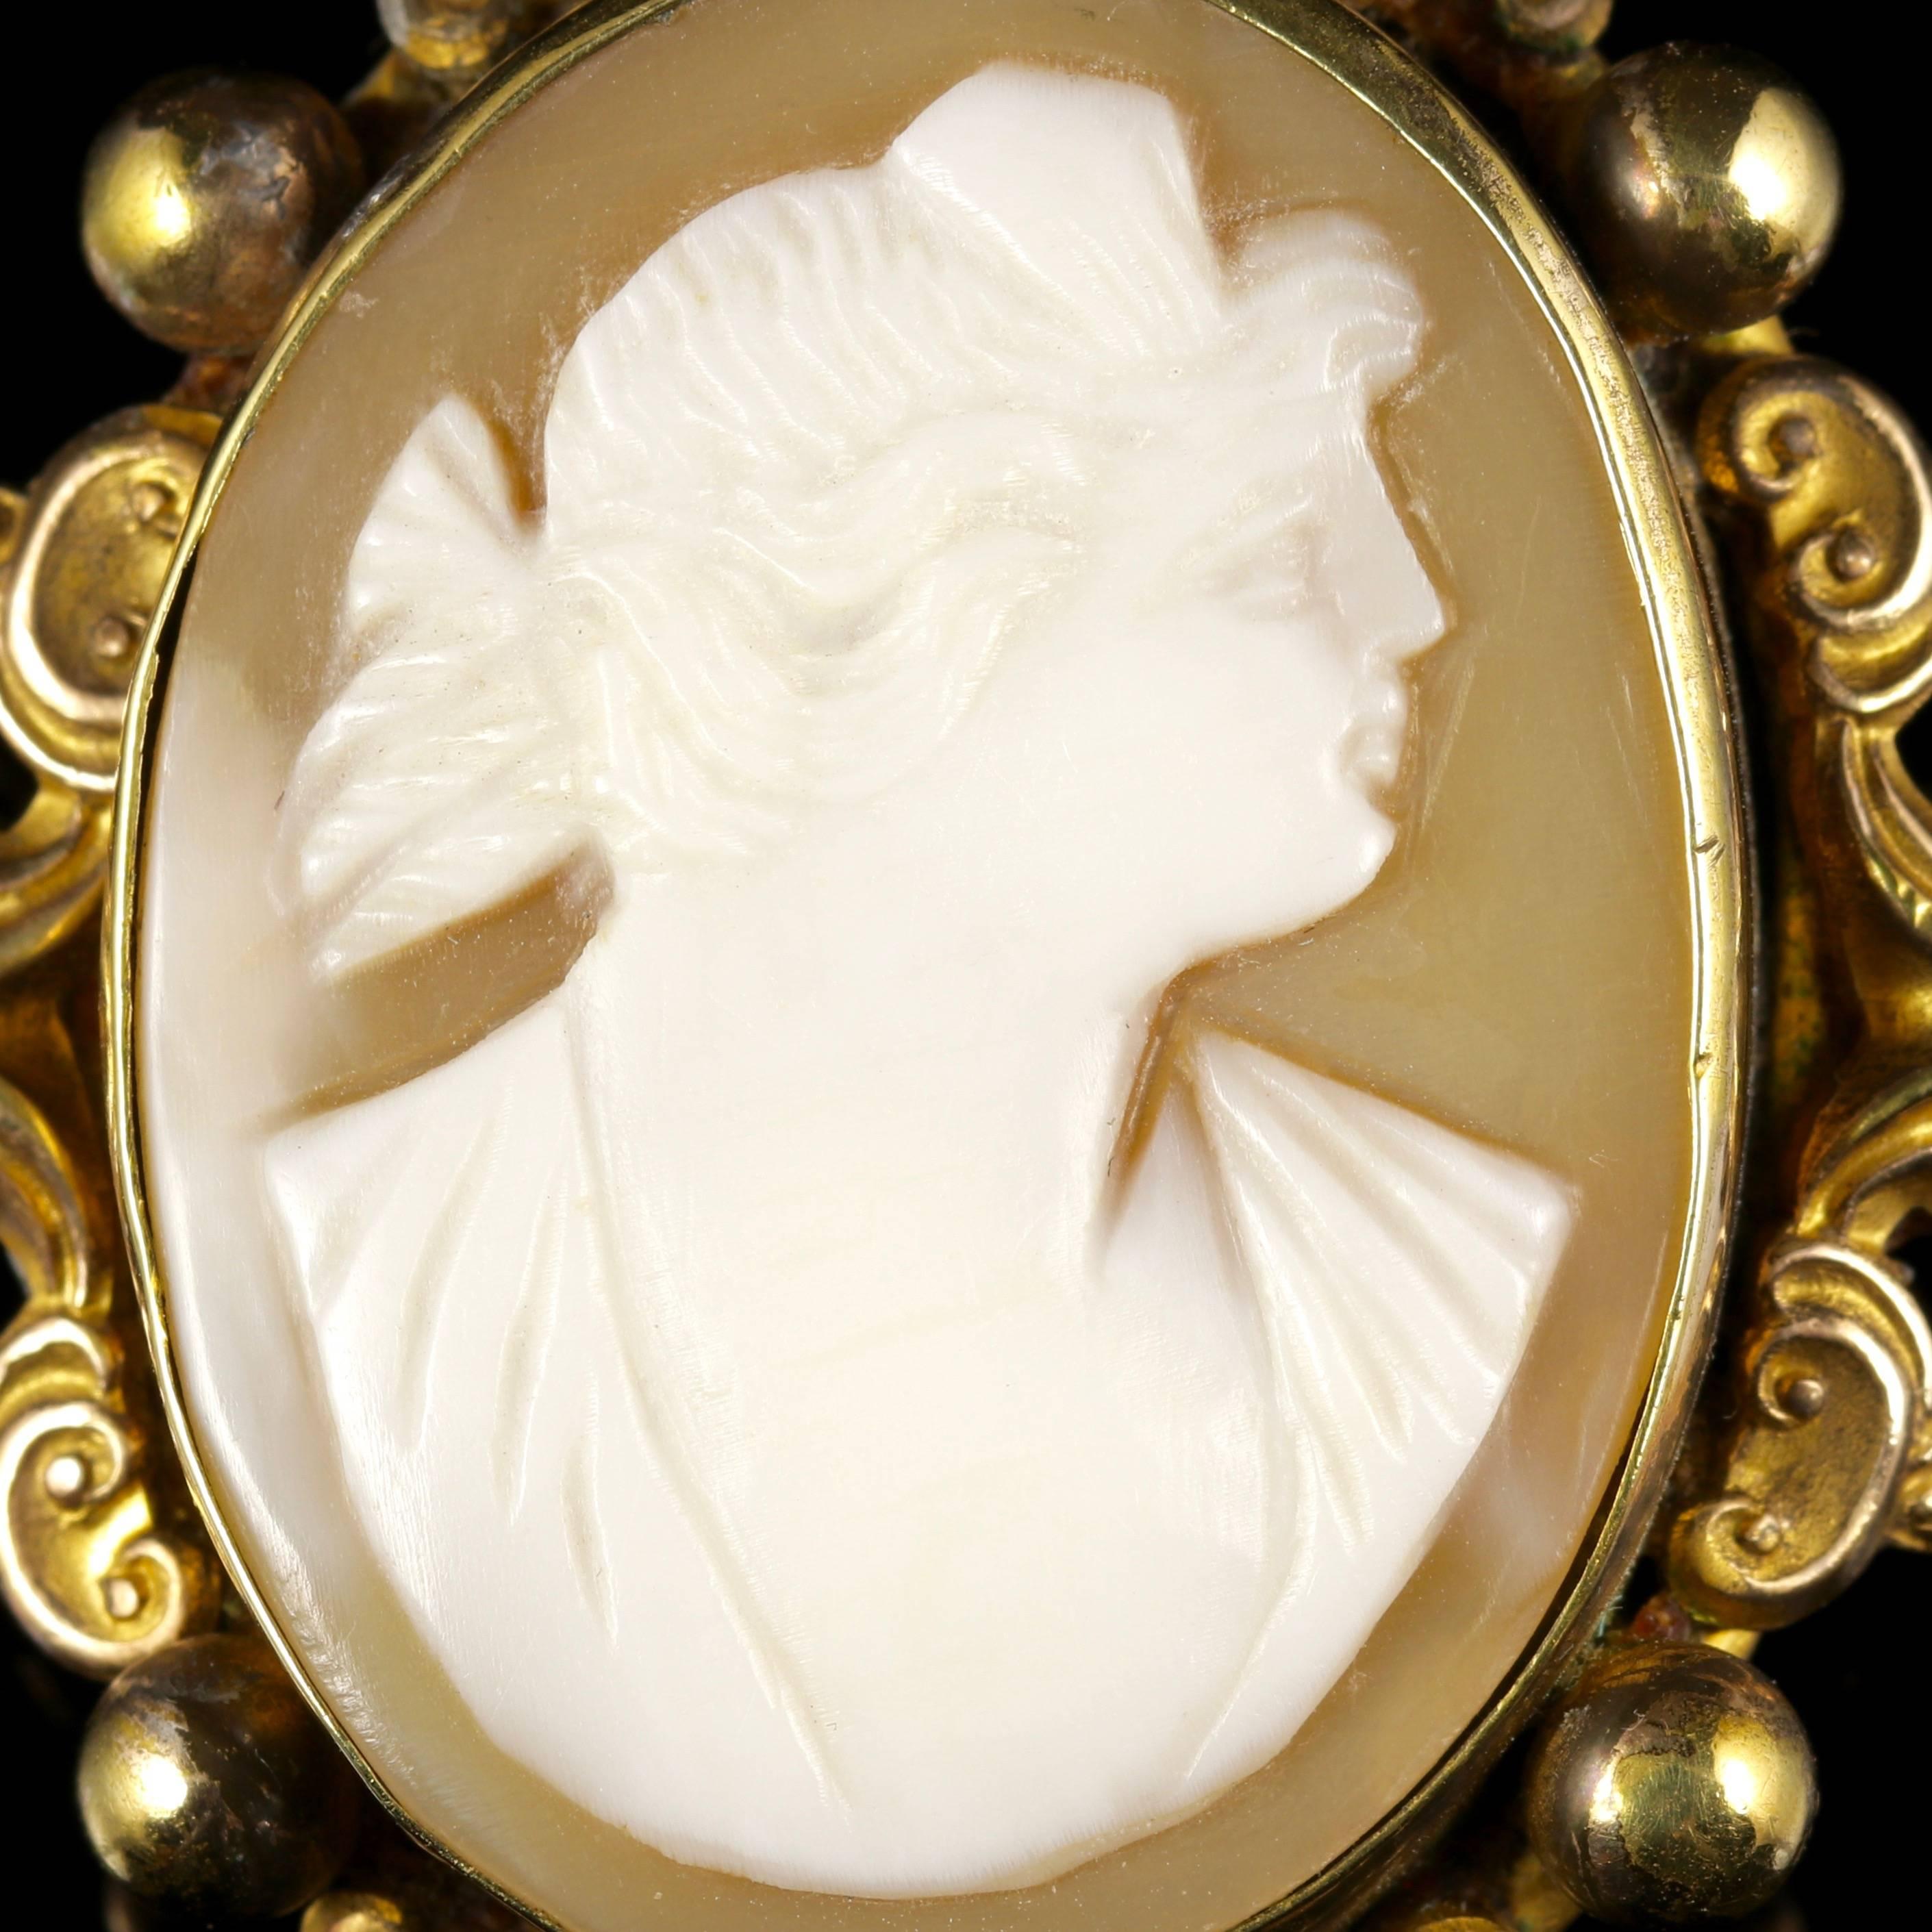 This fabulous Victorian Base Metal brooch is made of hand carved Bullmouth Shell.

The fabulous Cameo is carved superbly and executed with high relief workmanship, depicting a lovely profile of a lady.

The fabulous Bullmouth Shell has been popular